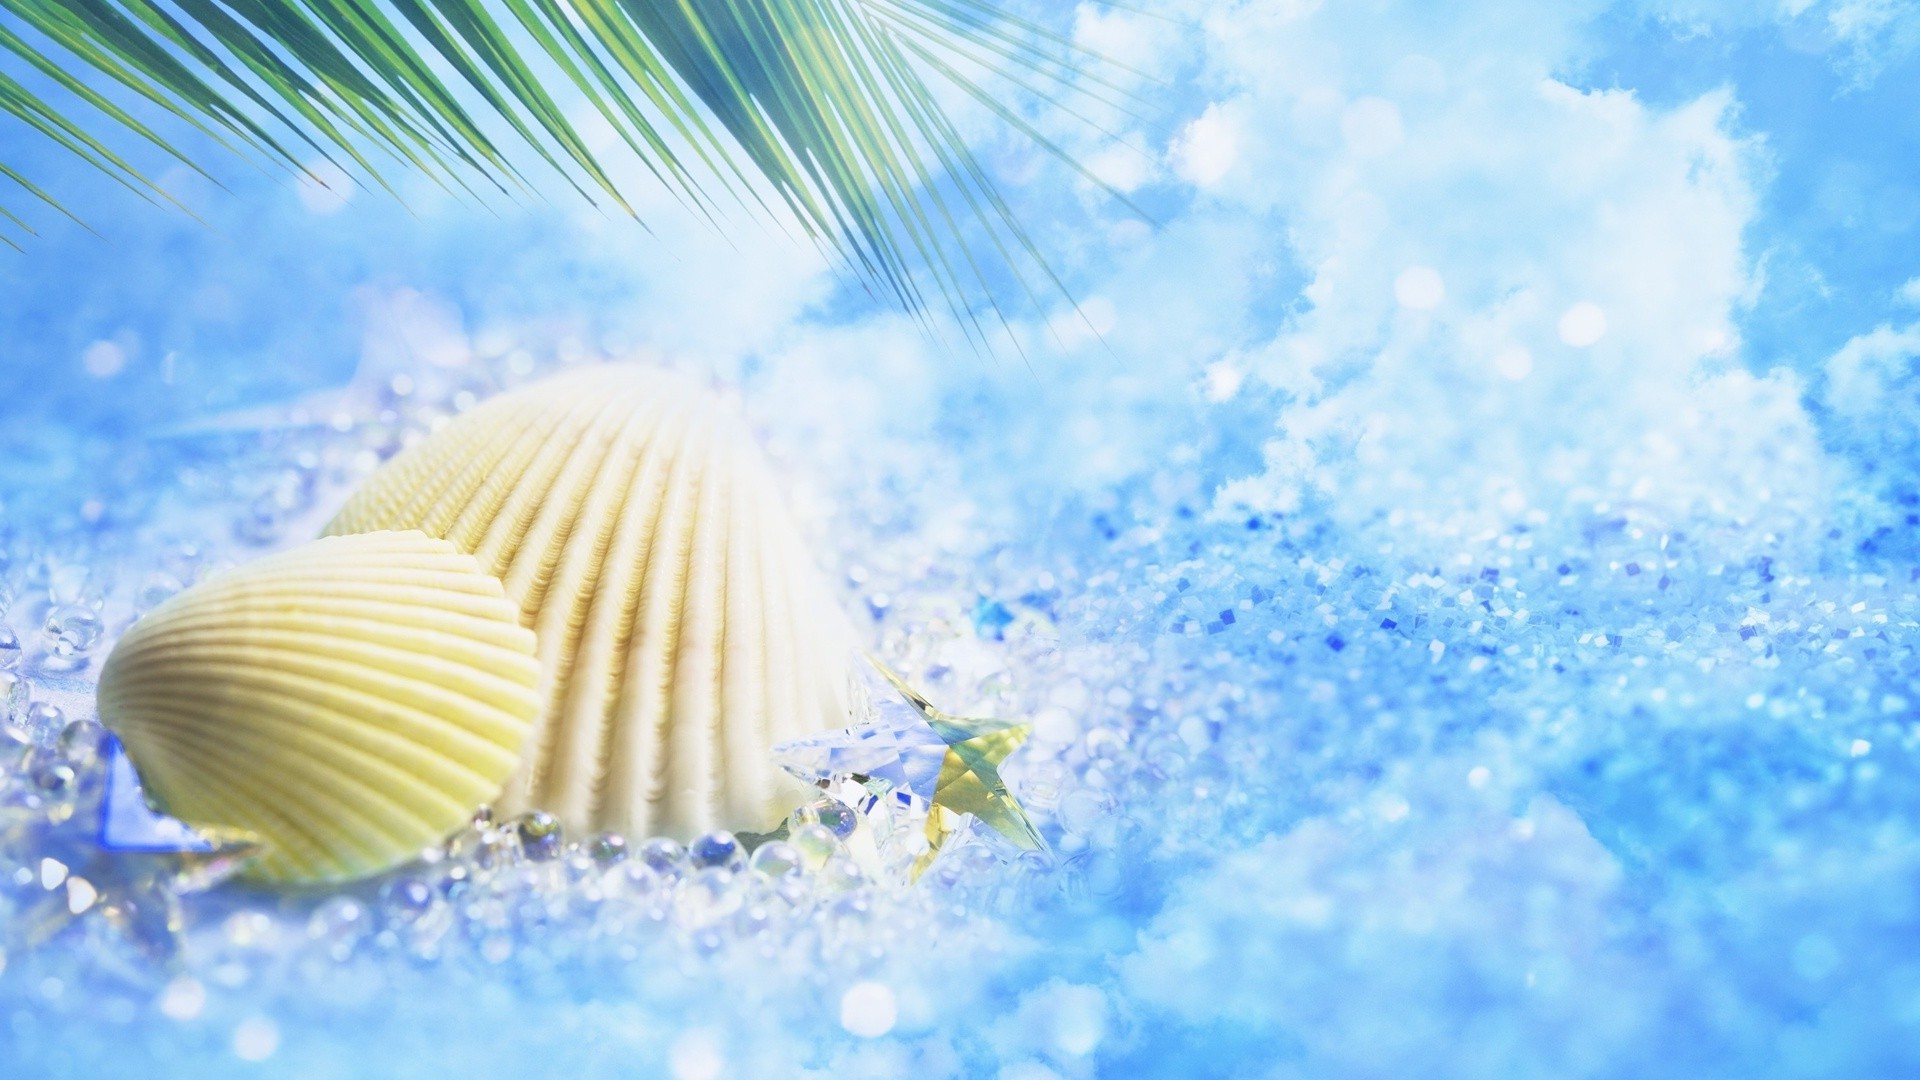 sea and ocean outdoors nature summer fair weather winter bright desktop sky tropical travel daylight seashell vacation